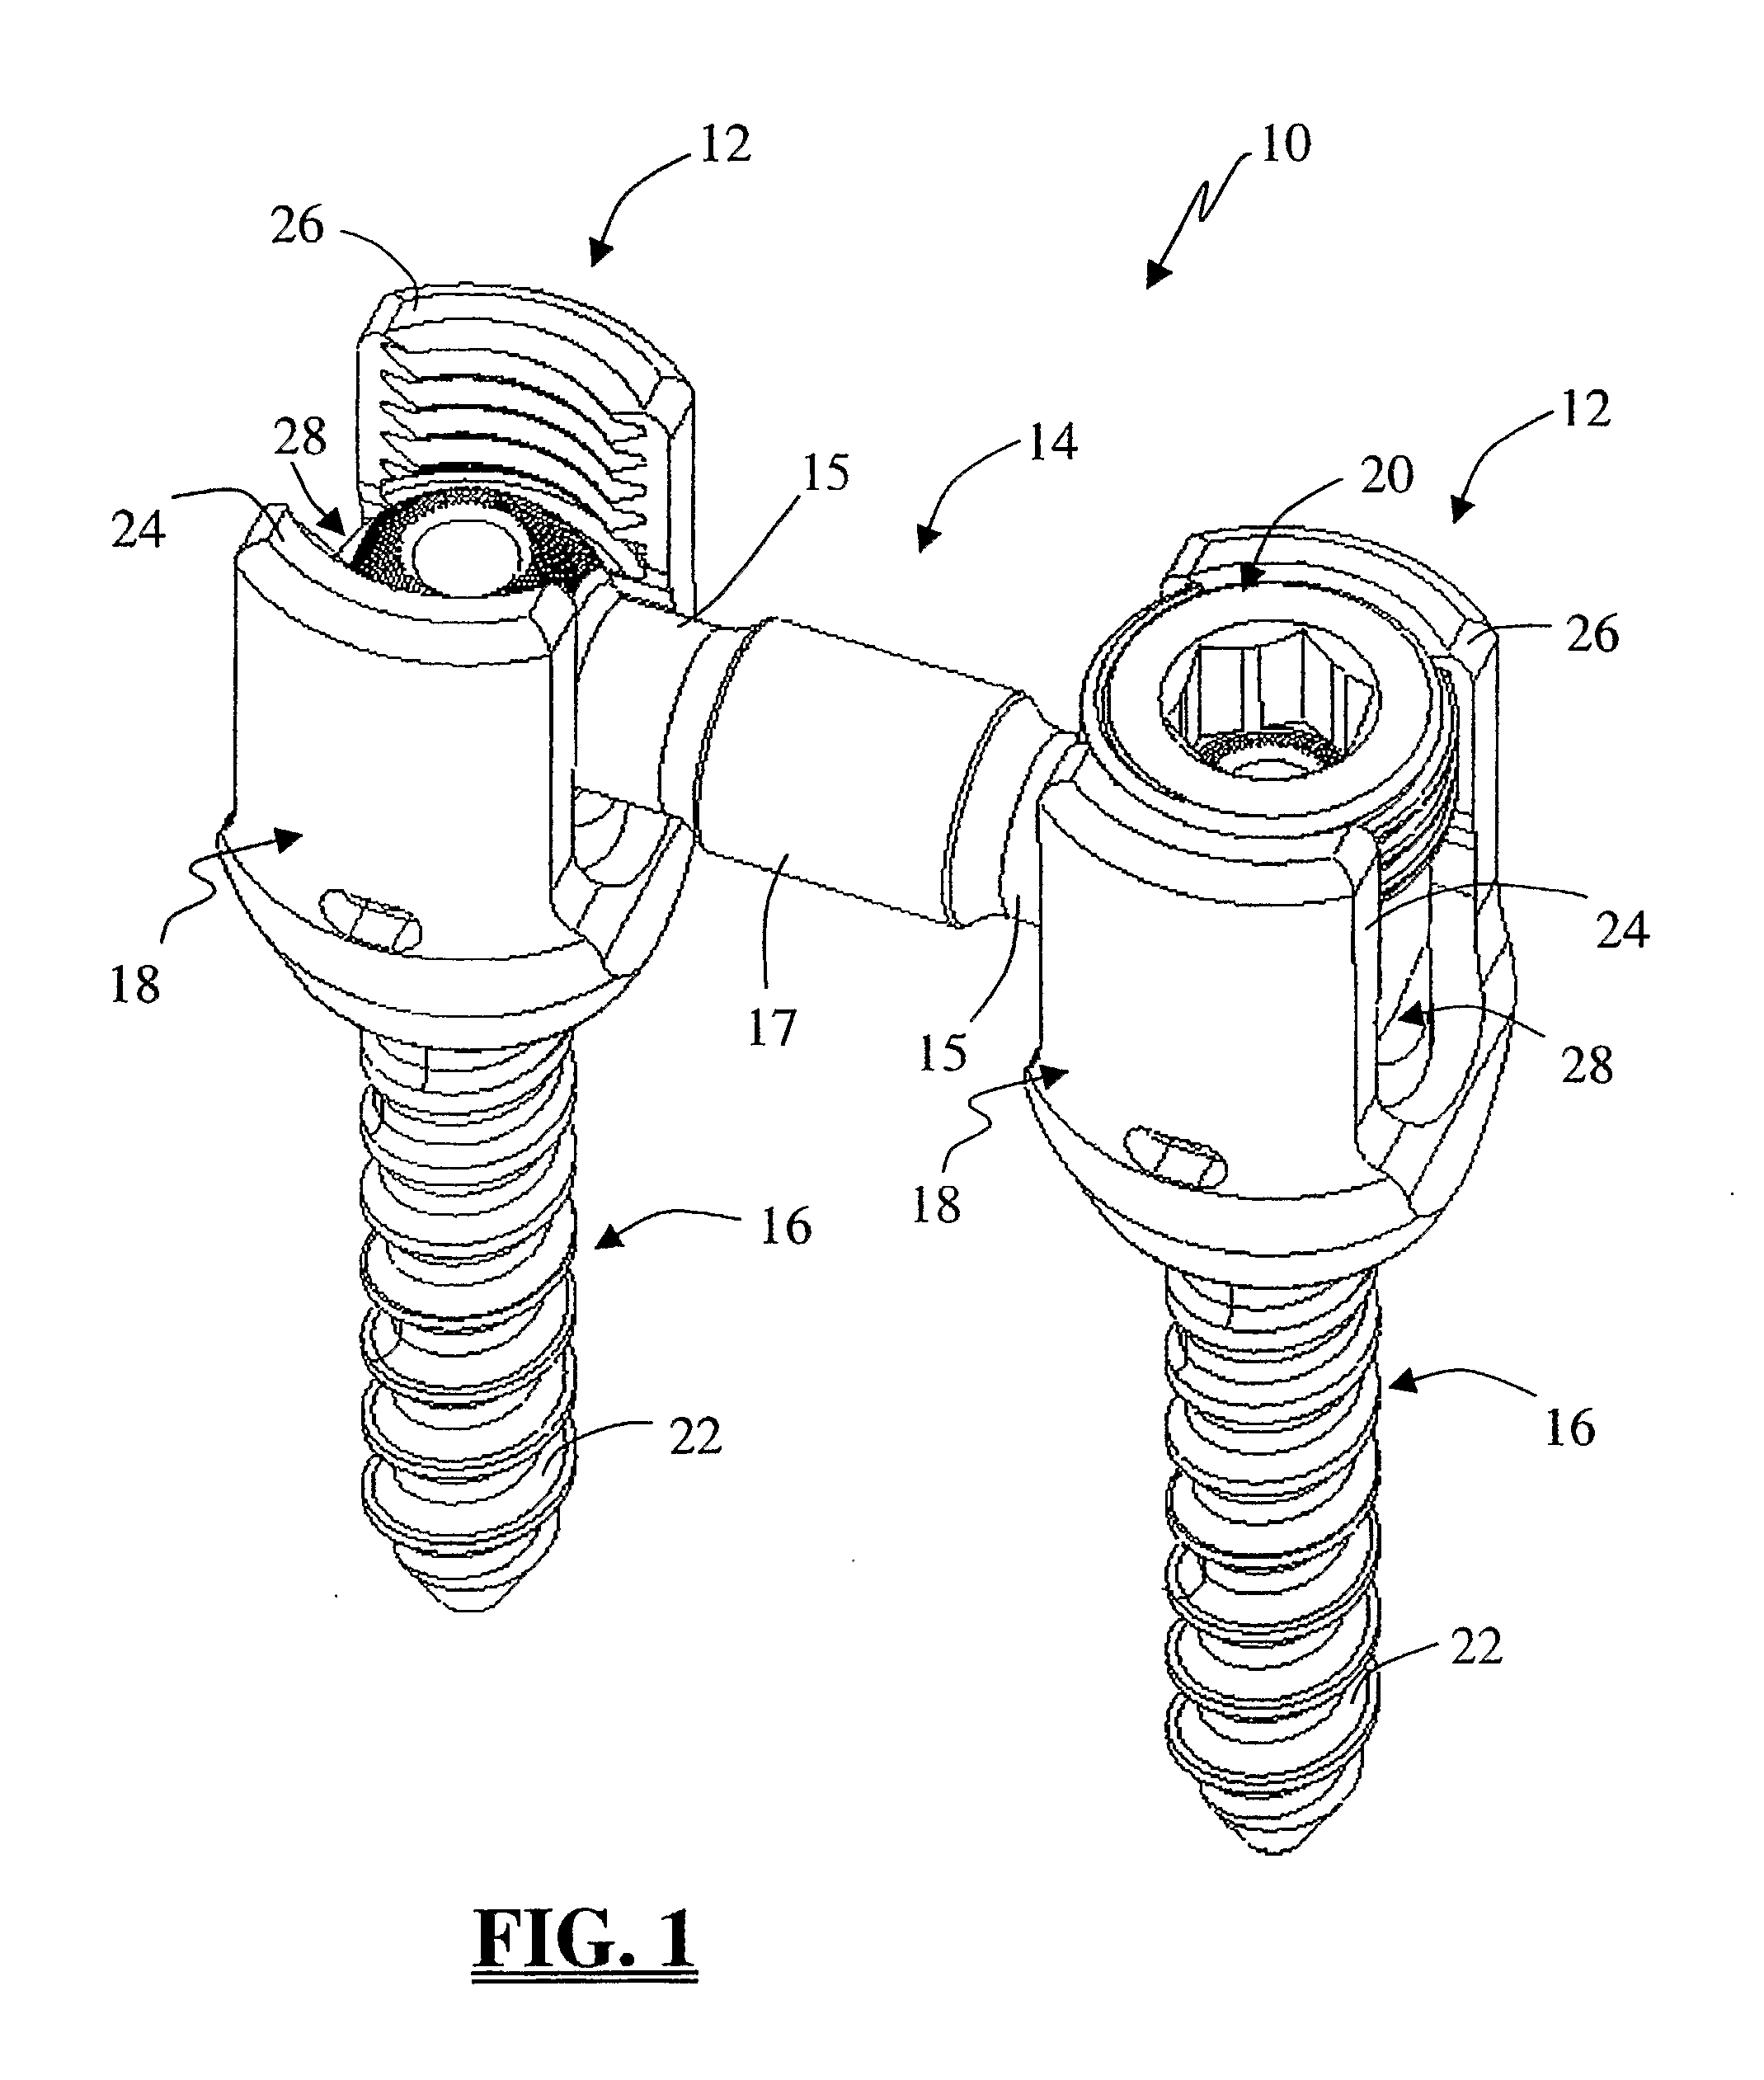 System and Methods For Performing Spinal Fixation